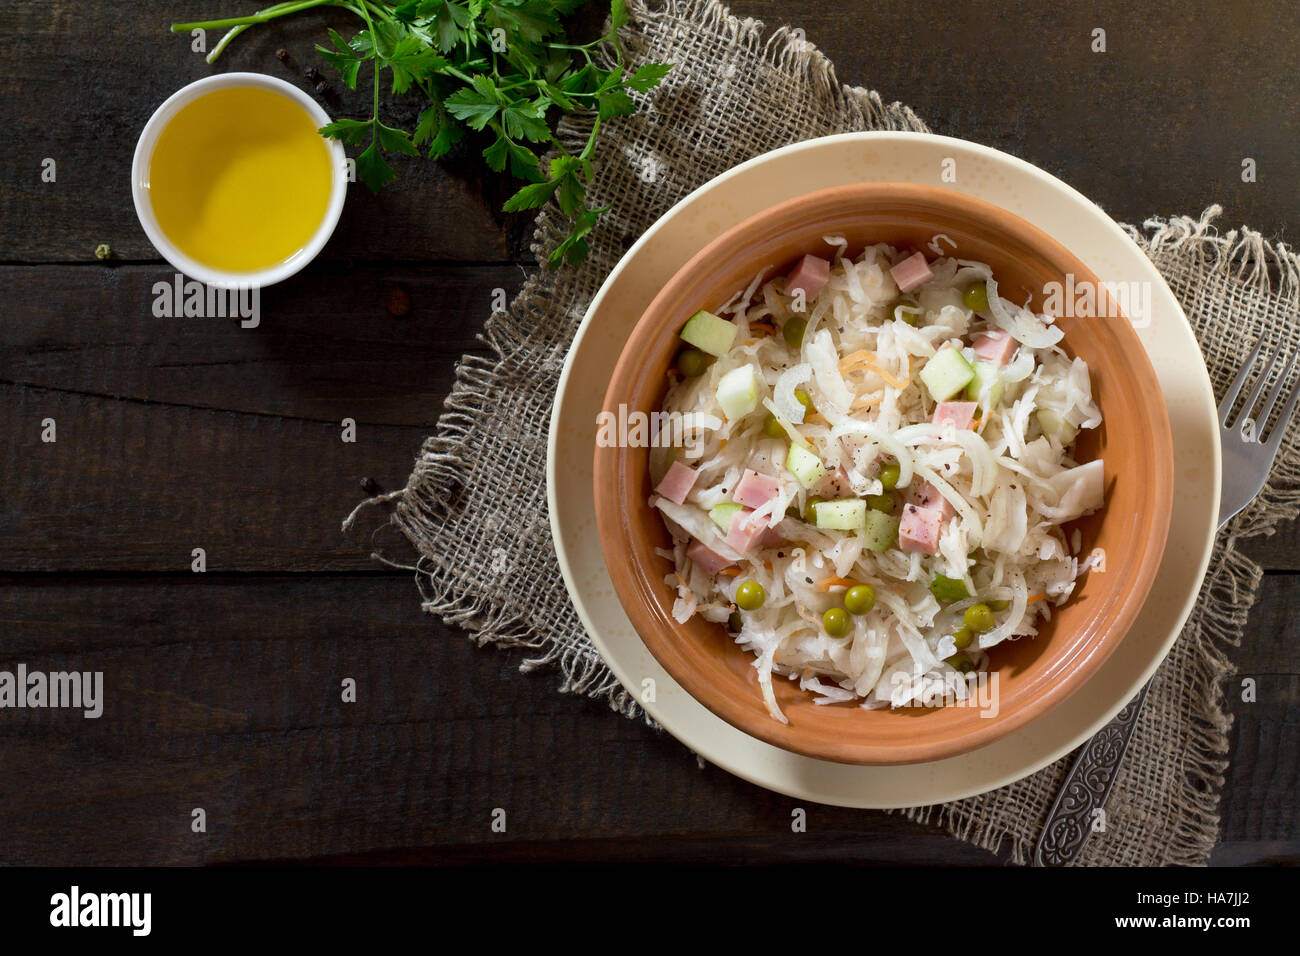 Salad with cabbage, chicken, apple, cucumber and walnuts. Healthy food concept. Top view. Stock Photo